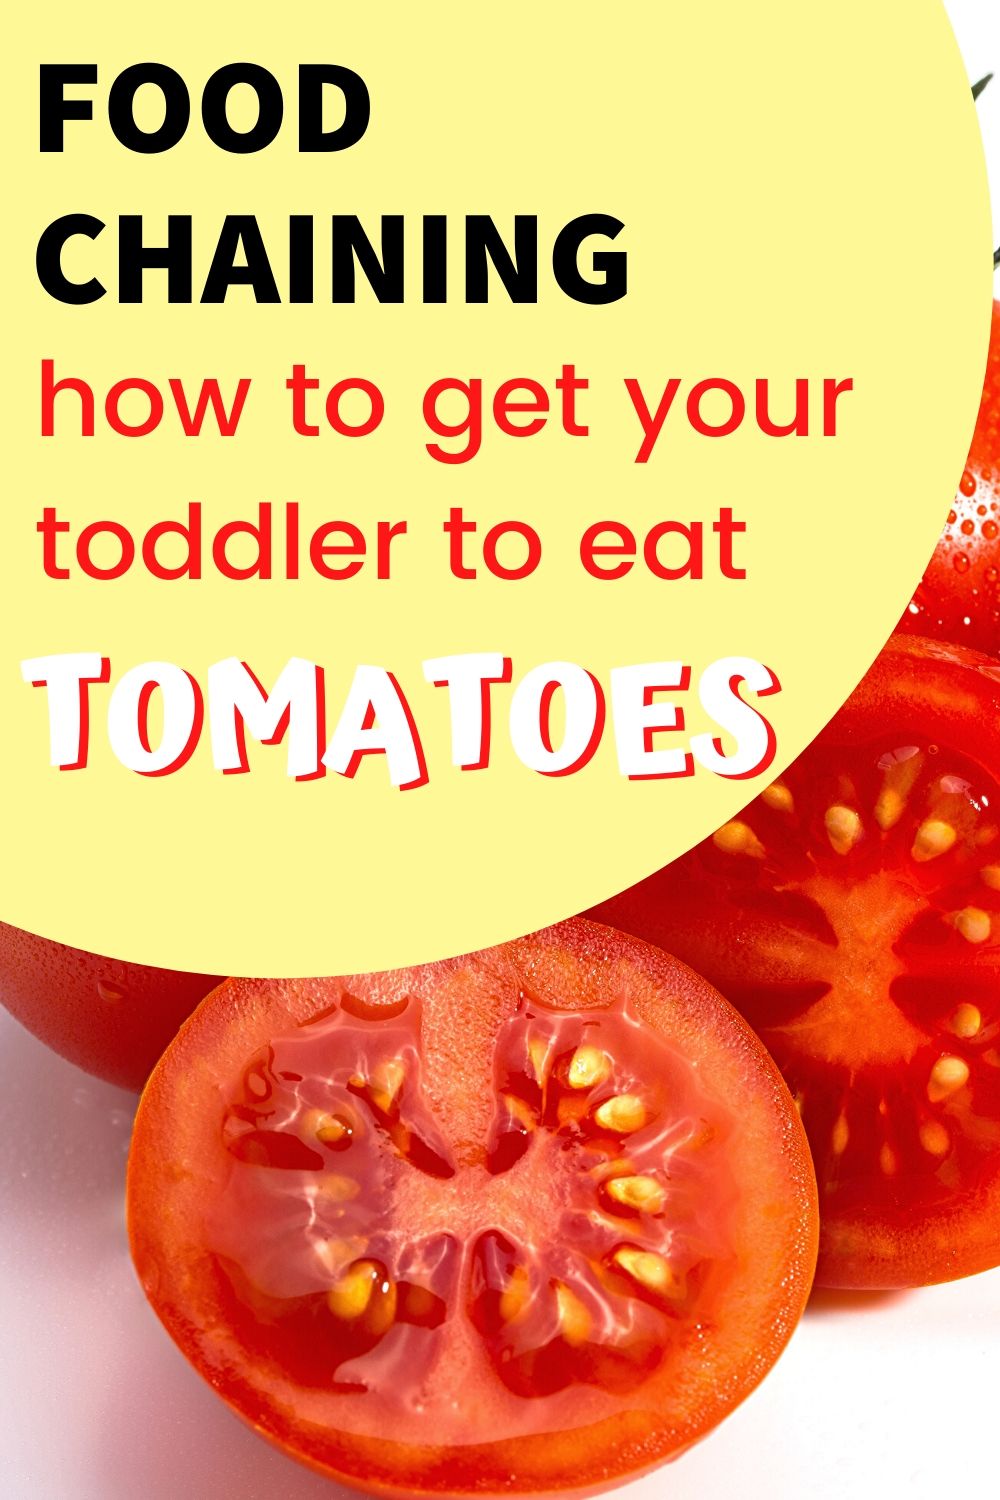 food chaining - how to get toddler to eat tomatoes - graphic